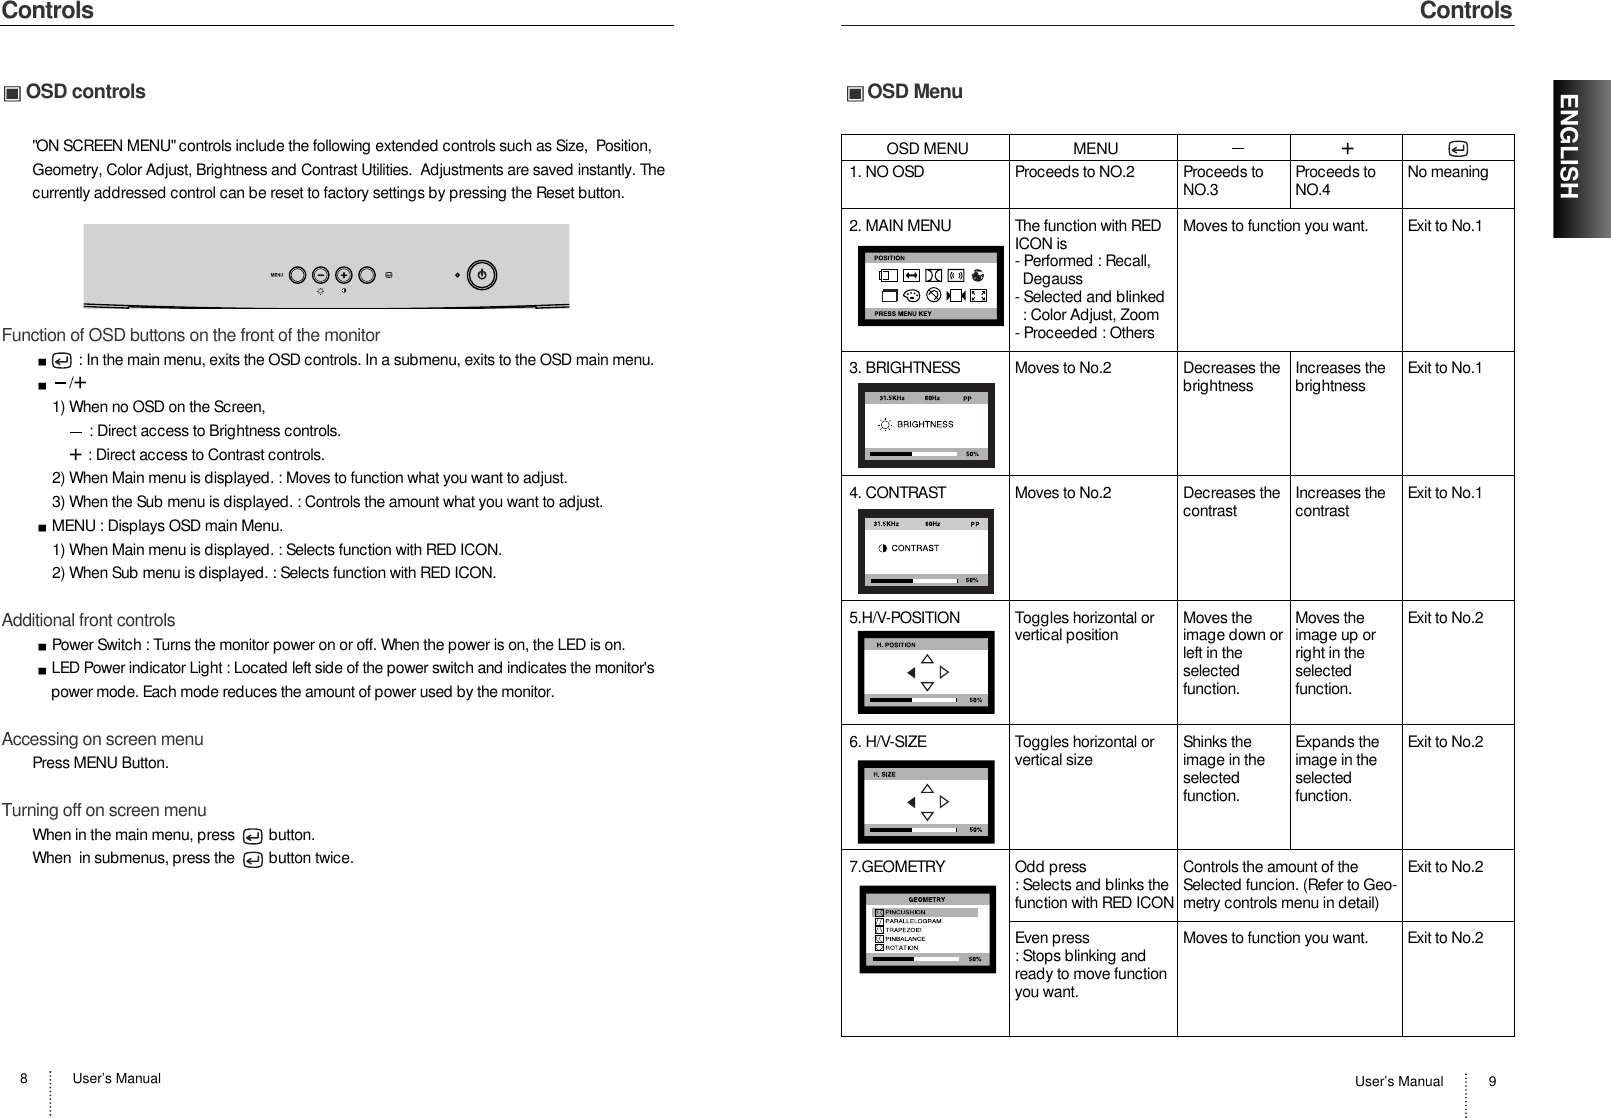 User’s Manual 9ENGLISHUser’s Manual8ControlsOSD MenuControlsOSD controls&quot;ON SCREEN MENU&quot; controls include the following extended controls such as Size,  Position,Geometry, Color Adjust, Brightness and Contrast Utilities.  Adjustments are saved instantly. Thecurrently addressed control can be reset to factory settings by pressing the Reset button. Function of OSD buttons on the front of the monitor: In the main menu, exits the OSD controls. In a submenu, exits to the OSD main menu./+1) When no OSD on the Screen,: Direct access to Brightness controls.+: Direct access to Contrast controls.2) When Main menu is displayed. : Moves to function what you want to adjust.3) When the Sub menu is displayed. : Controls the amount what you want to adjust.MENU : Displays OSD main Menu.1) When Main menu is displayed. : Selects function with RED ICON.2) When Sub menu is displayed. : Selects function with RED ICON.Additional front controlsPower Switch : Turns the monitor power on or off. When the power is on, the LED is on.LED Power indicator Light : Located left side of the power switch and indicates the monitor&apos;spower mode. Each mode reduces the amount of power used by the monitor.Accessing on screen menuPress MENU Button.Turning off on screen menuWhen in the main menu, press  button.When  in submenus, press the  button twice.OSD MENU MENU +1. NO OSD Proceeds to NO.2 Proceeds to Proceeds to No meaningNO.3 NO.42. MAIN MENU The function with RED Moves to function you want. Exit to No.1ICON is- Performed : Recall, Degauss- Selected and blinked: Color Adjust, Zoom- Proceeded : Others3. BRIGHTNESS Moves to No.2 Decreases the Increases the Exit to No.1brightness brightness4. CONTRAST Moves to No.2 Decreases the Increases the Exit to No.1contrast contrast5.H/V-POSITION Toggles horizontal or Moves the  Moves the  Exit to No.2vertical position image down or image up orleft in the  right in theselected selectedfunction. function.6. H/V-SIZE Toggles horizontal or Shinks the Expands the Exit to No.2vertical size image in the image in theselected selectedfunction. function.7.GEOMETRY Odd press Controls the amount of the Exit to No.2: Selects and blinks the  Selected funcion. (Refer to Geo-function with RED ICON metry controls menu in detail)Even press Moves to function you want. Exit to No.2: Stops blinking andready to move functionyou want.